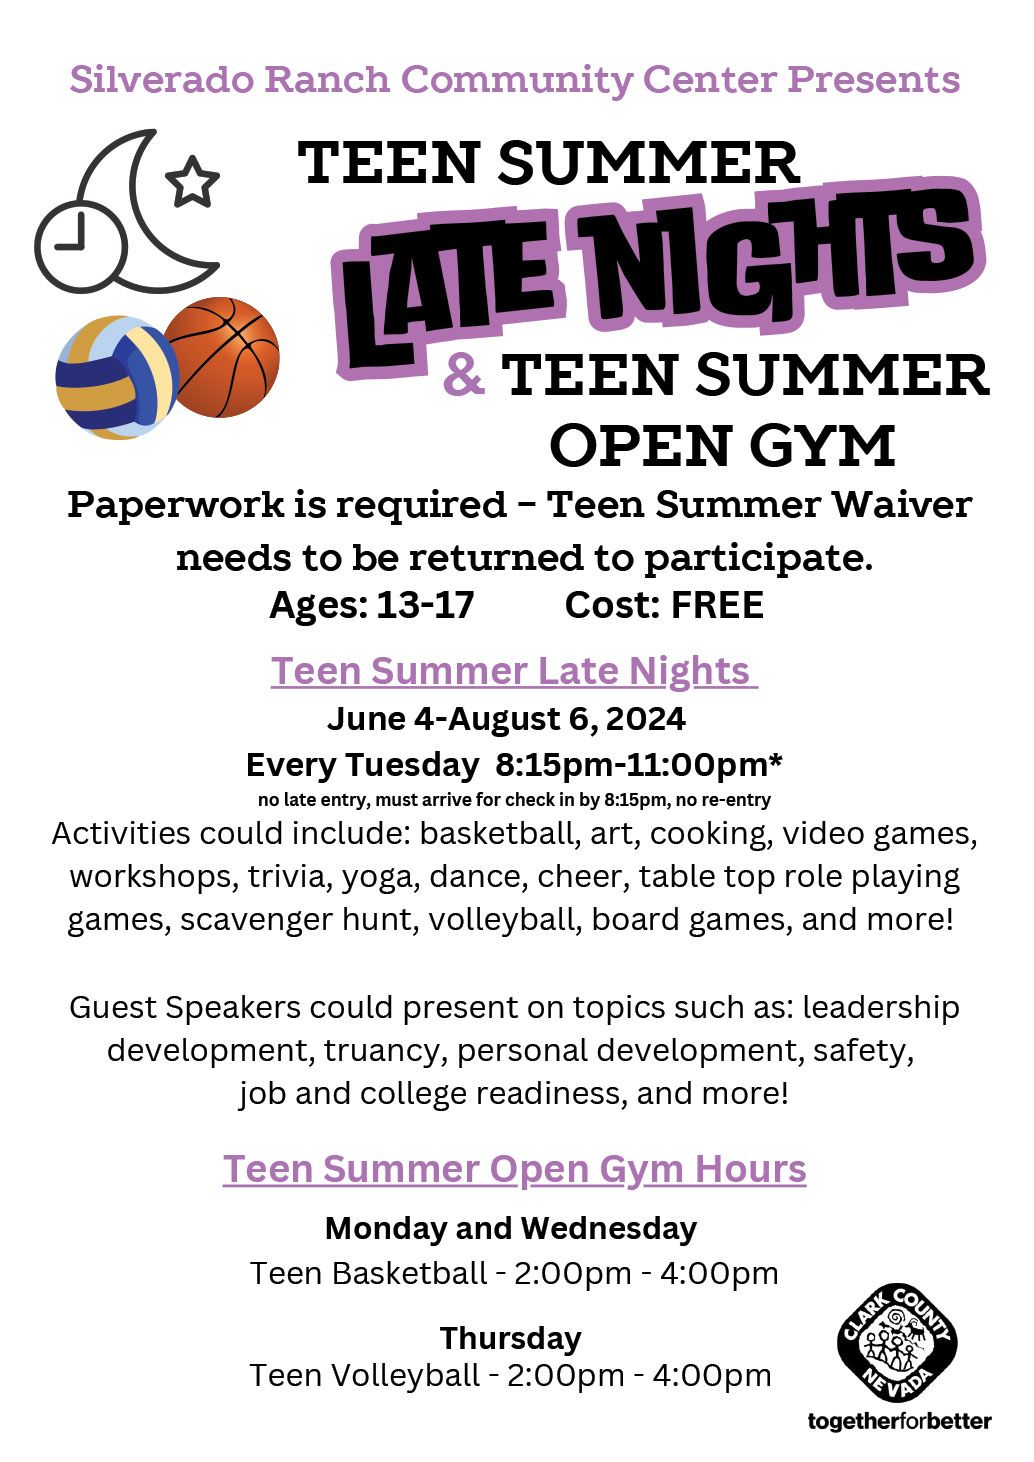 srcc-Teen-Late-Night-Open-Gym-Flyer